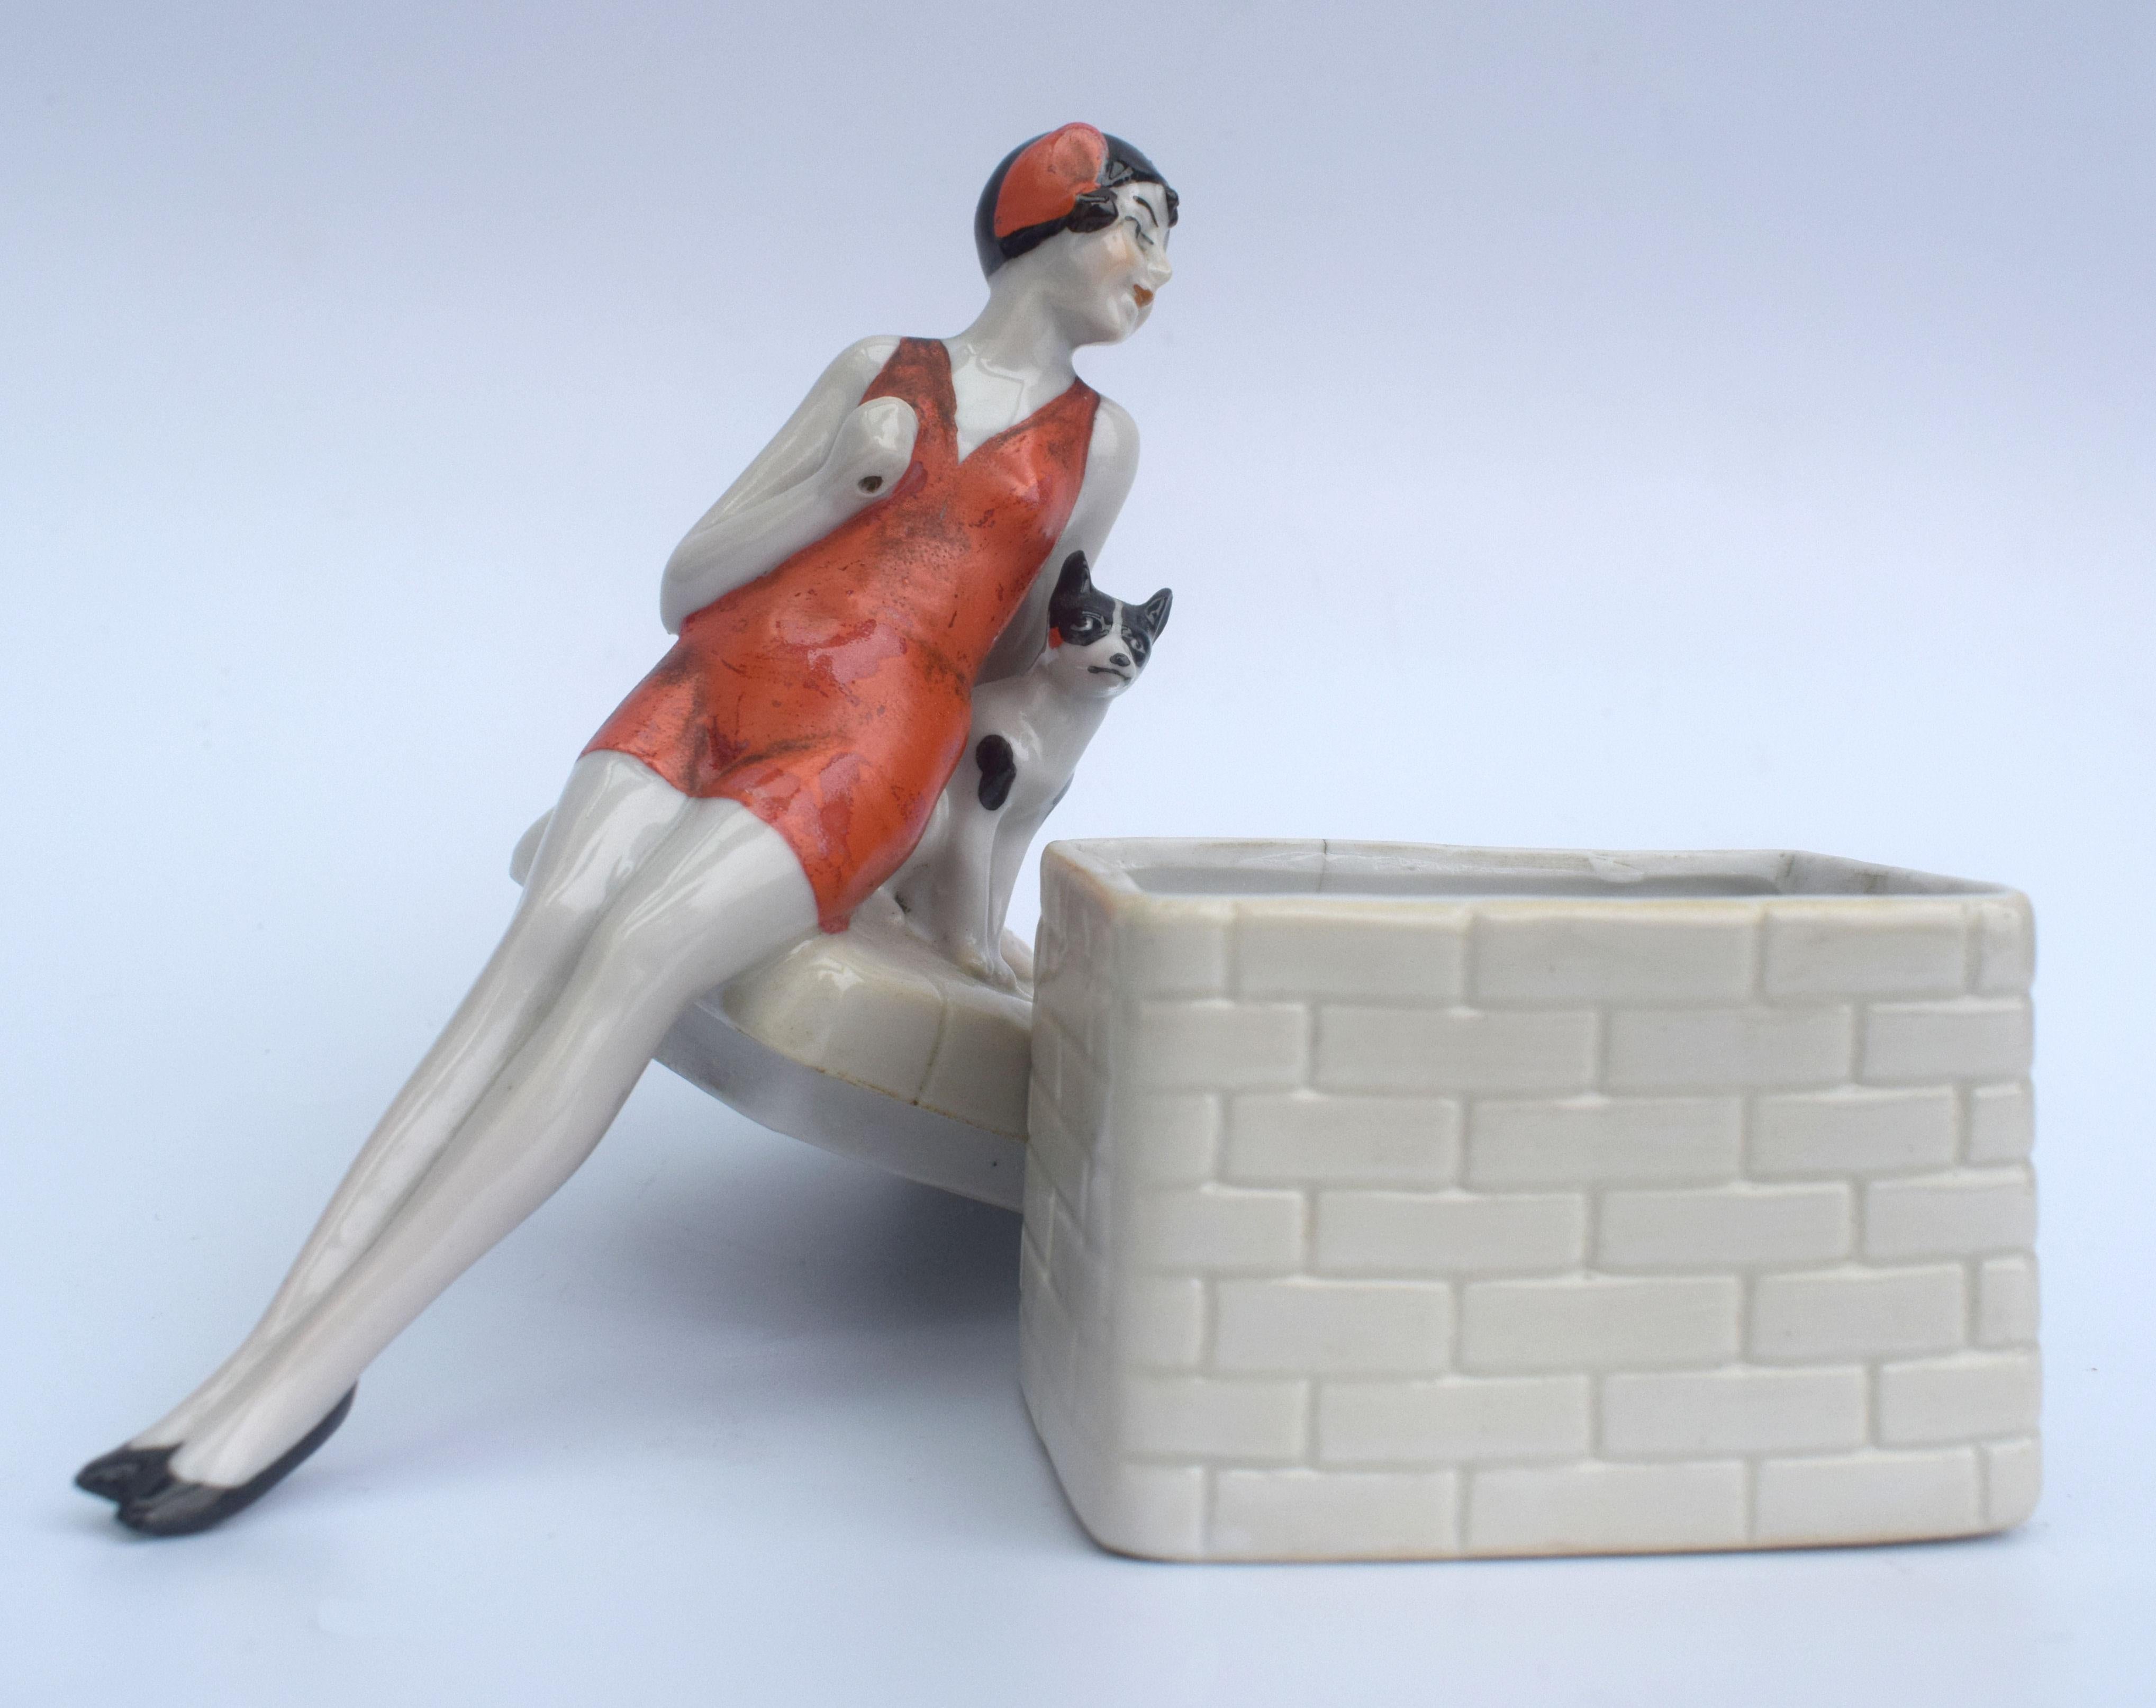 Dating to the 1930s this very attractive and rare Art Deco trinket powder jar or box which is part of the half doll family. Depicts a flapper girl leaning on a brick box with her dog, marked numbers to the base are 5660. The attention to detail is